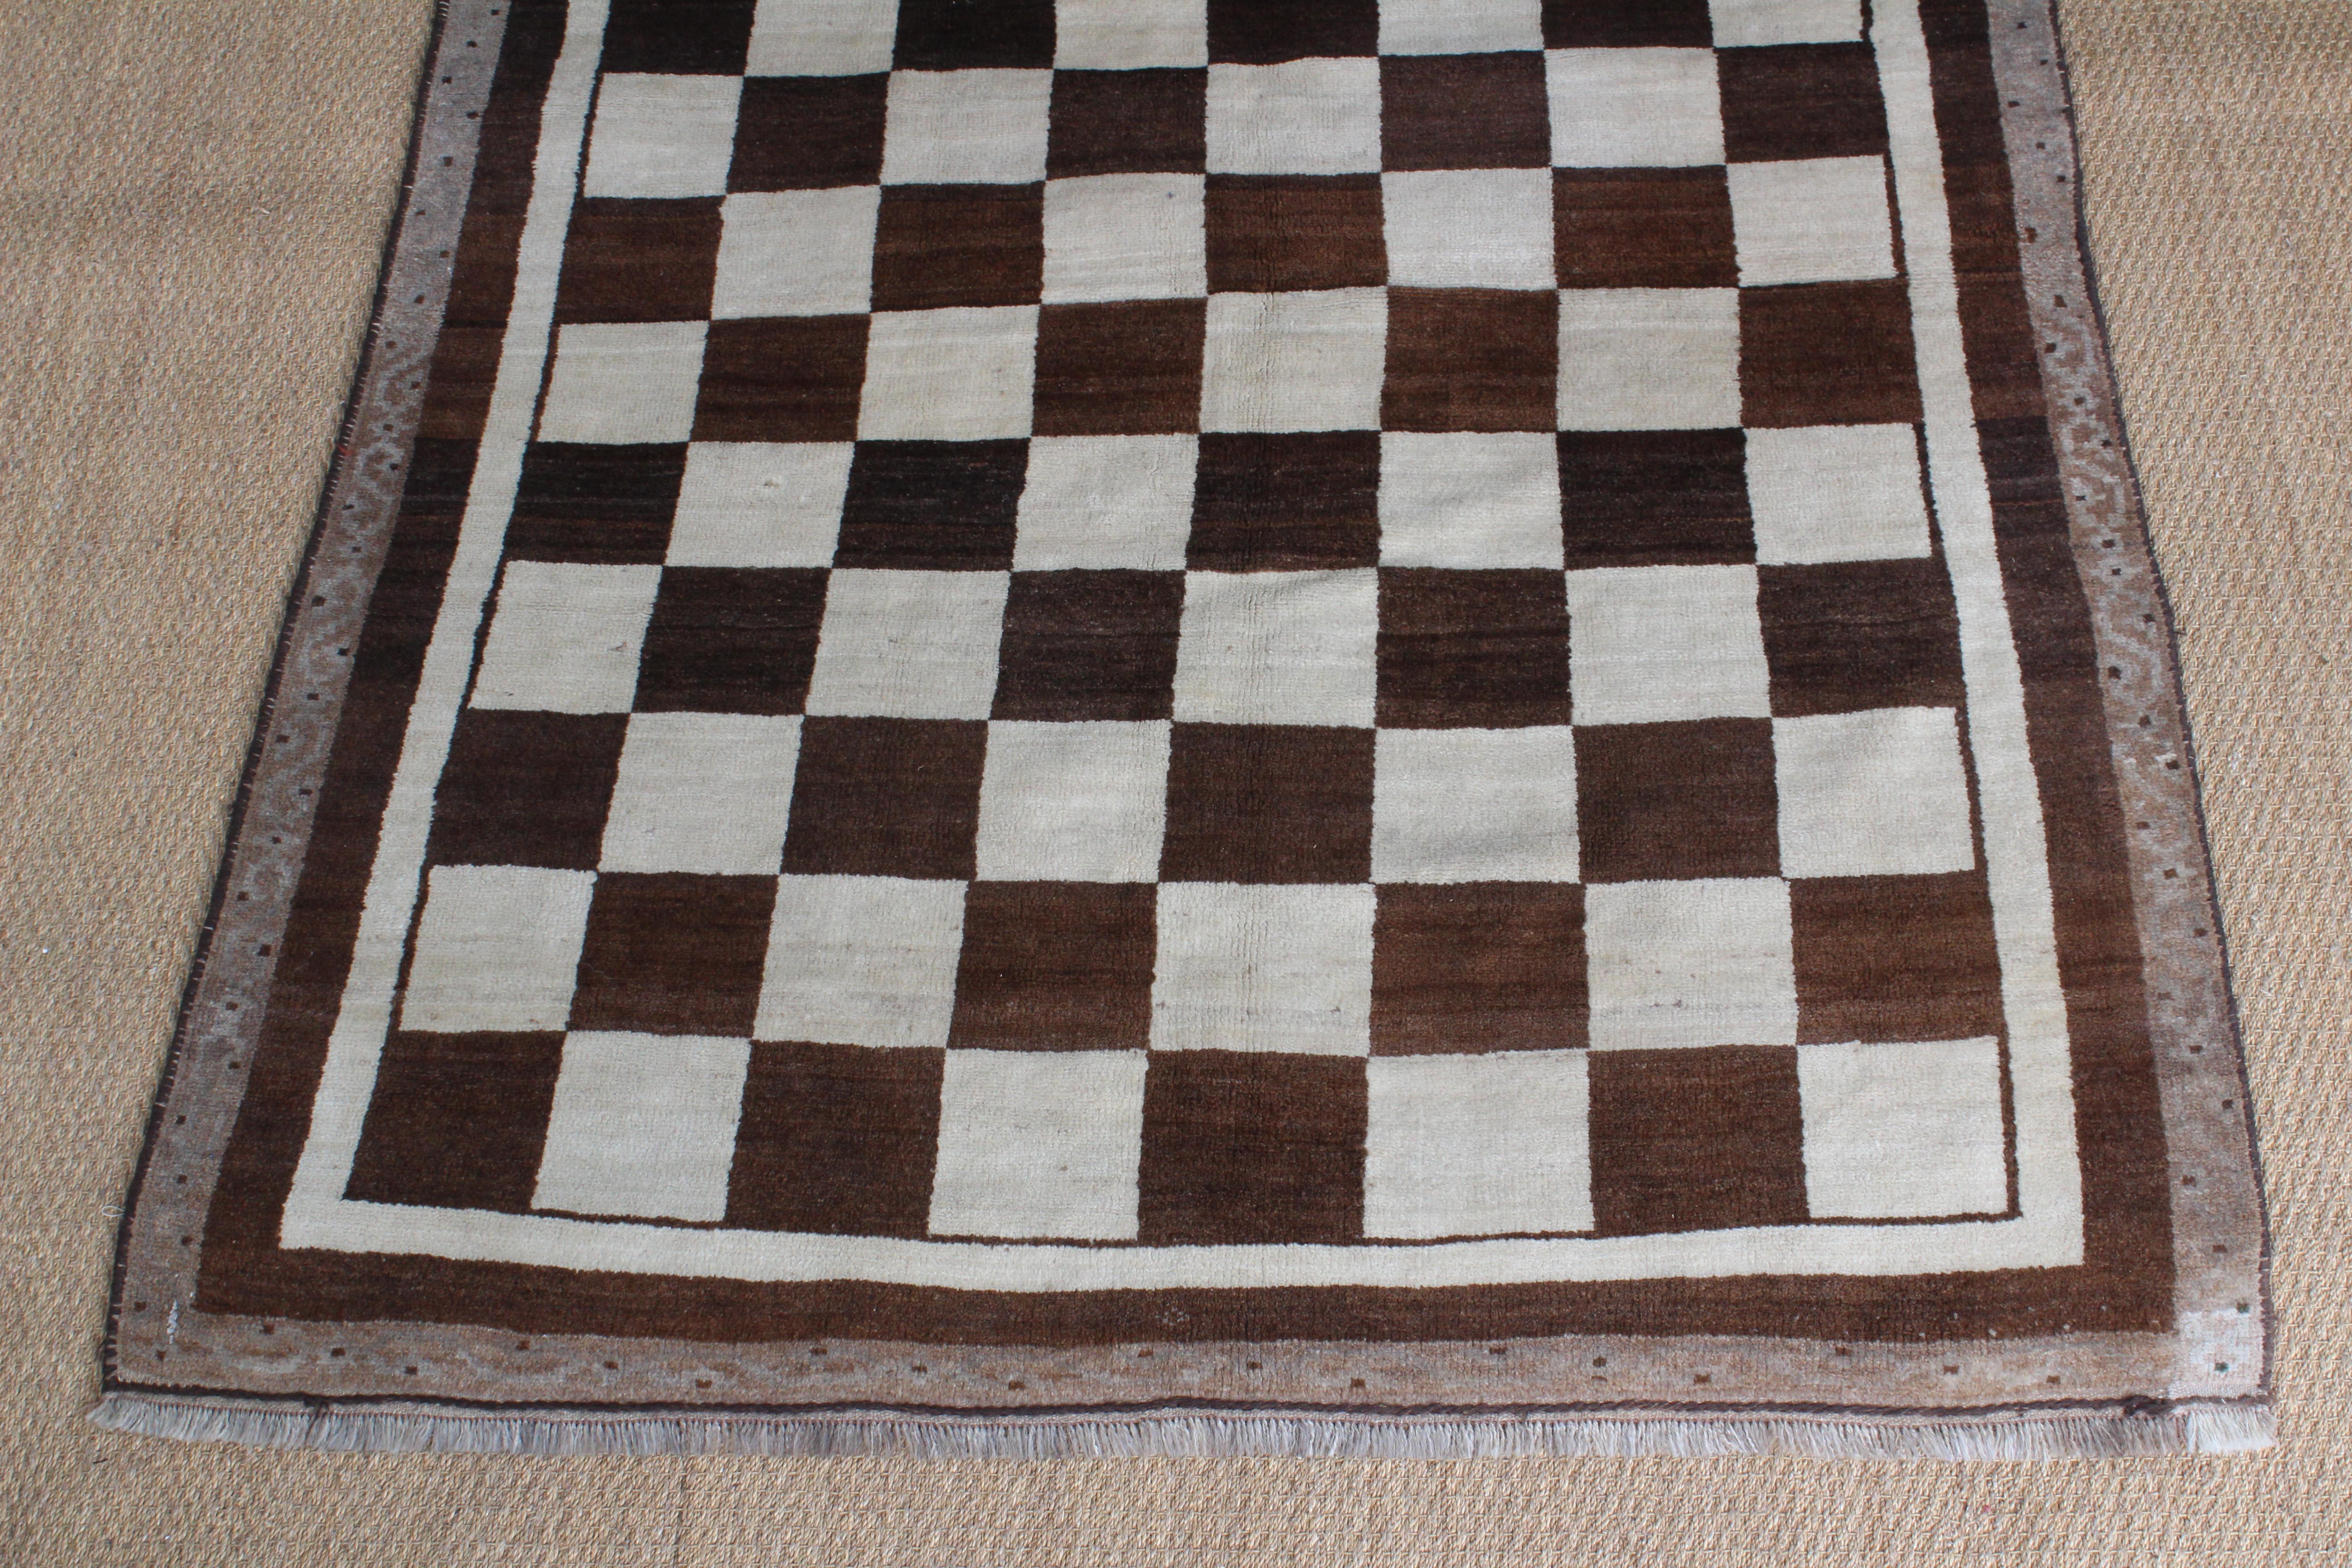 Large vintage mid-20th century Persian checkered Gabbeh rug. Brown and beige with a detailed border. In excellent condition, made of wool. Measures: 80